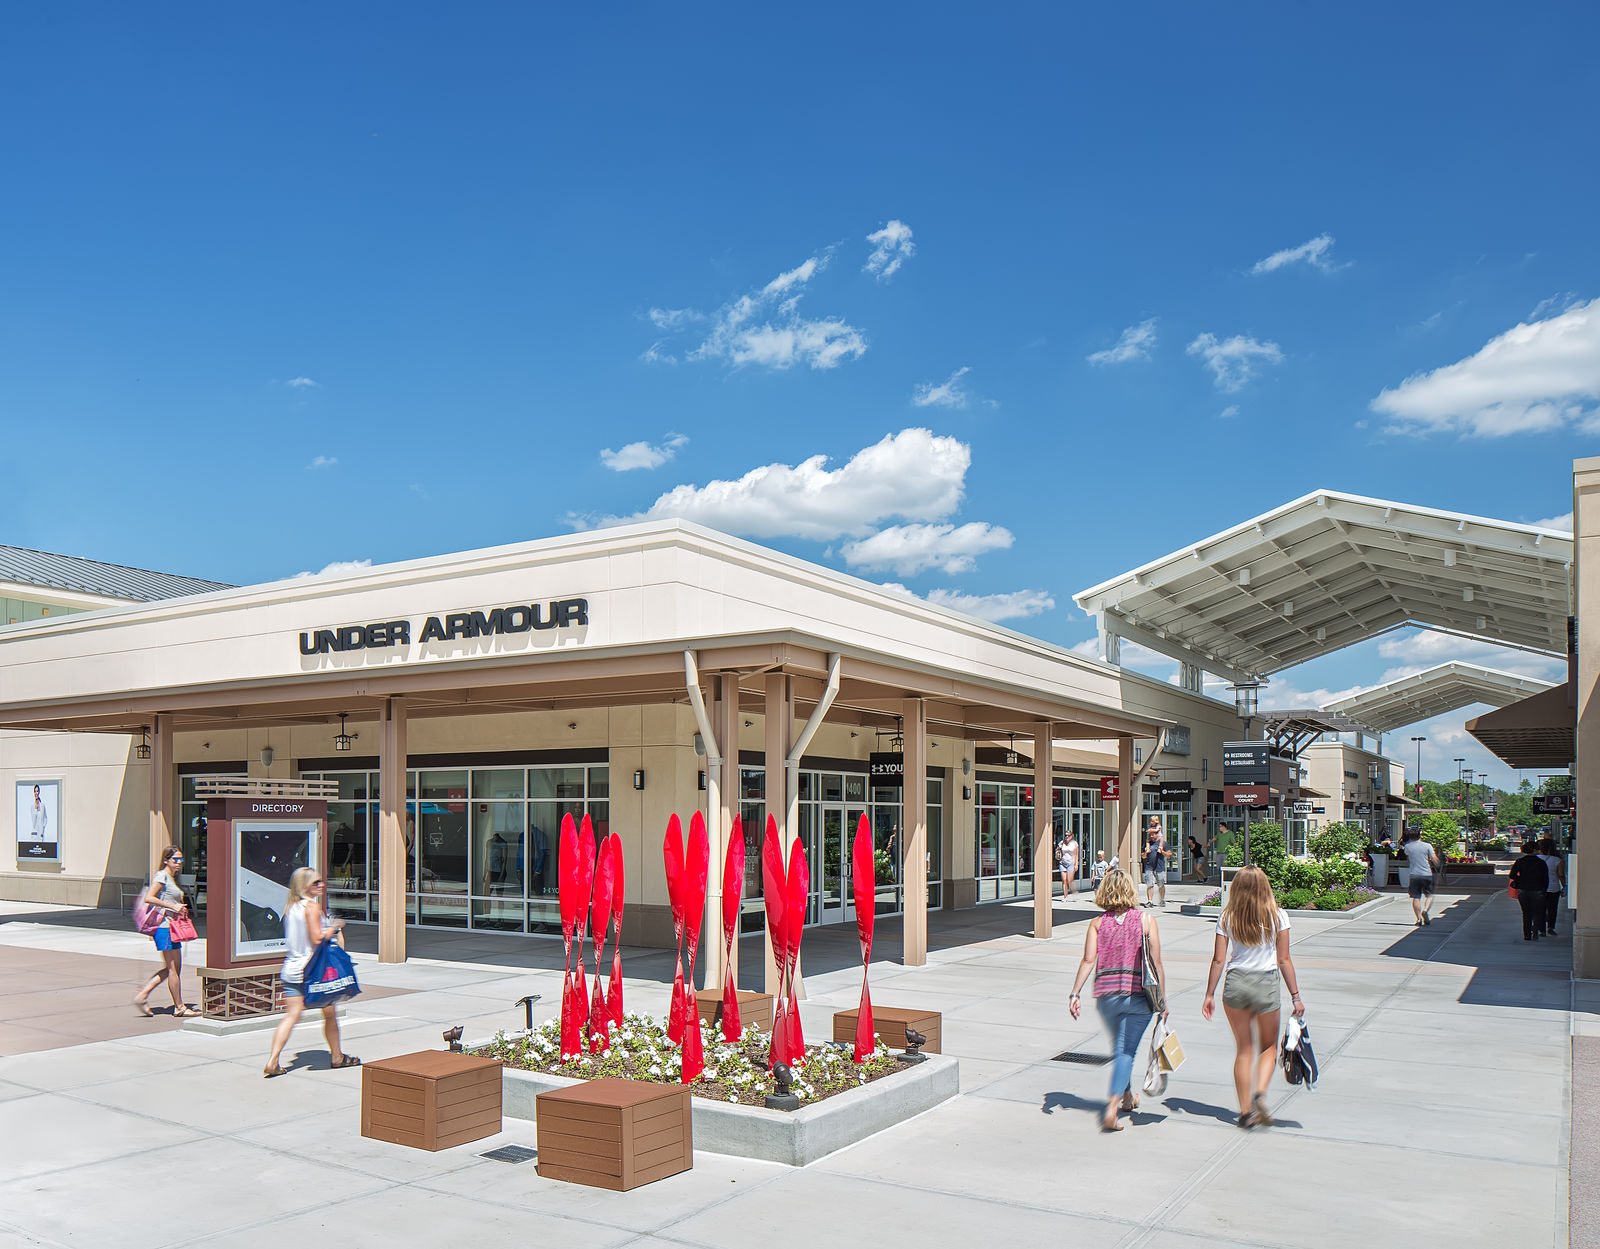 Chicago Premium Outlets - 114 tips from 20080 visitors